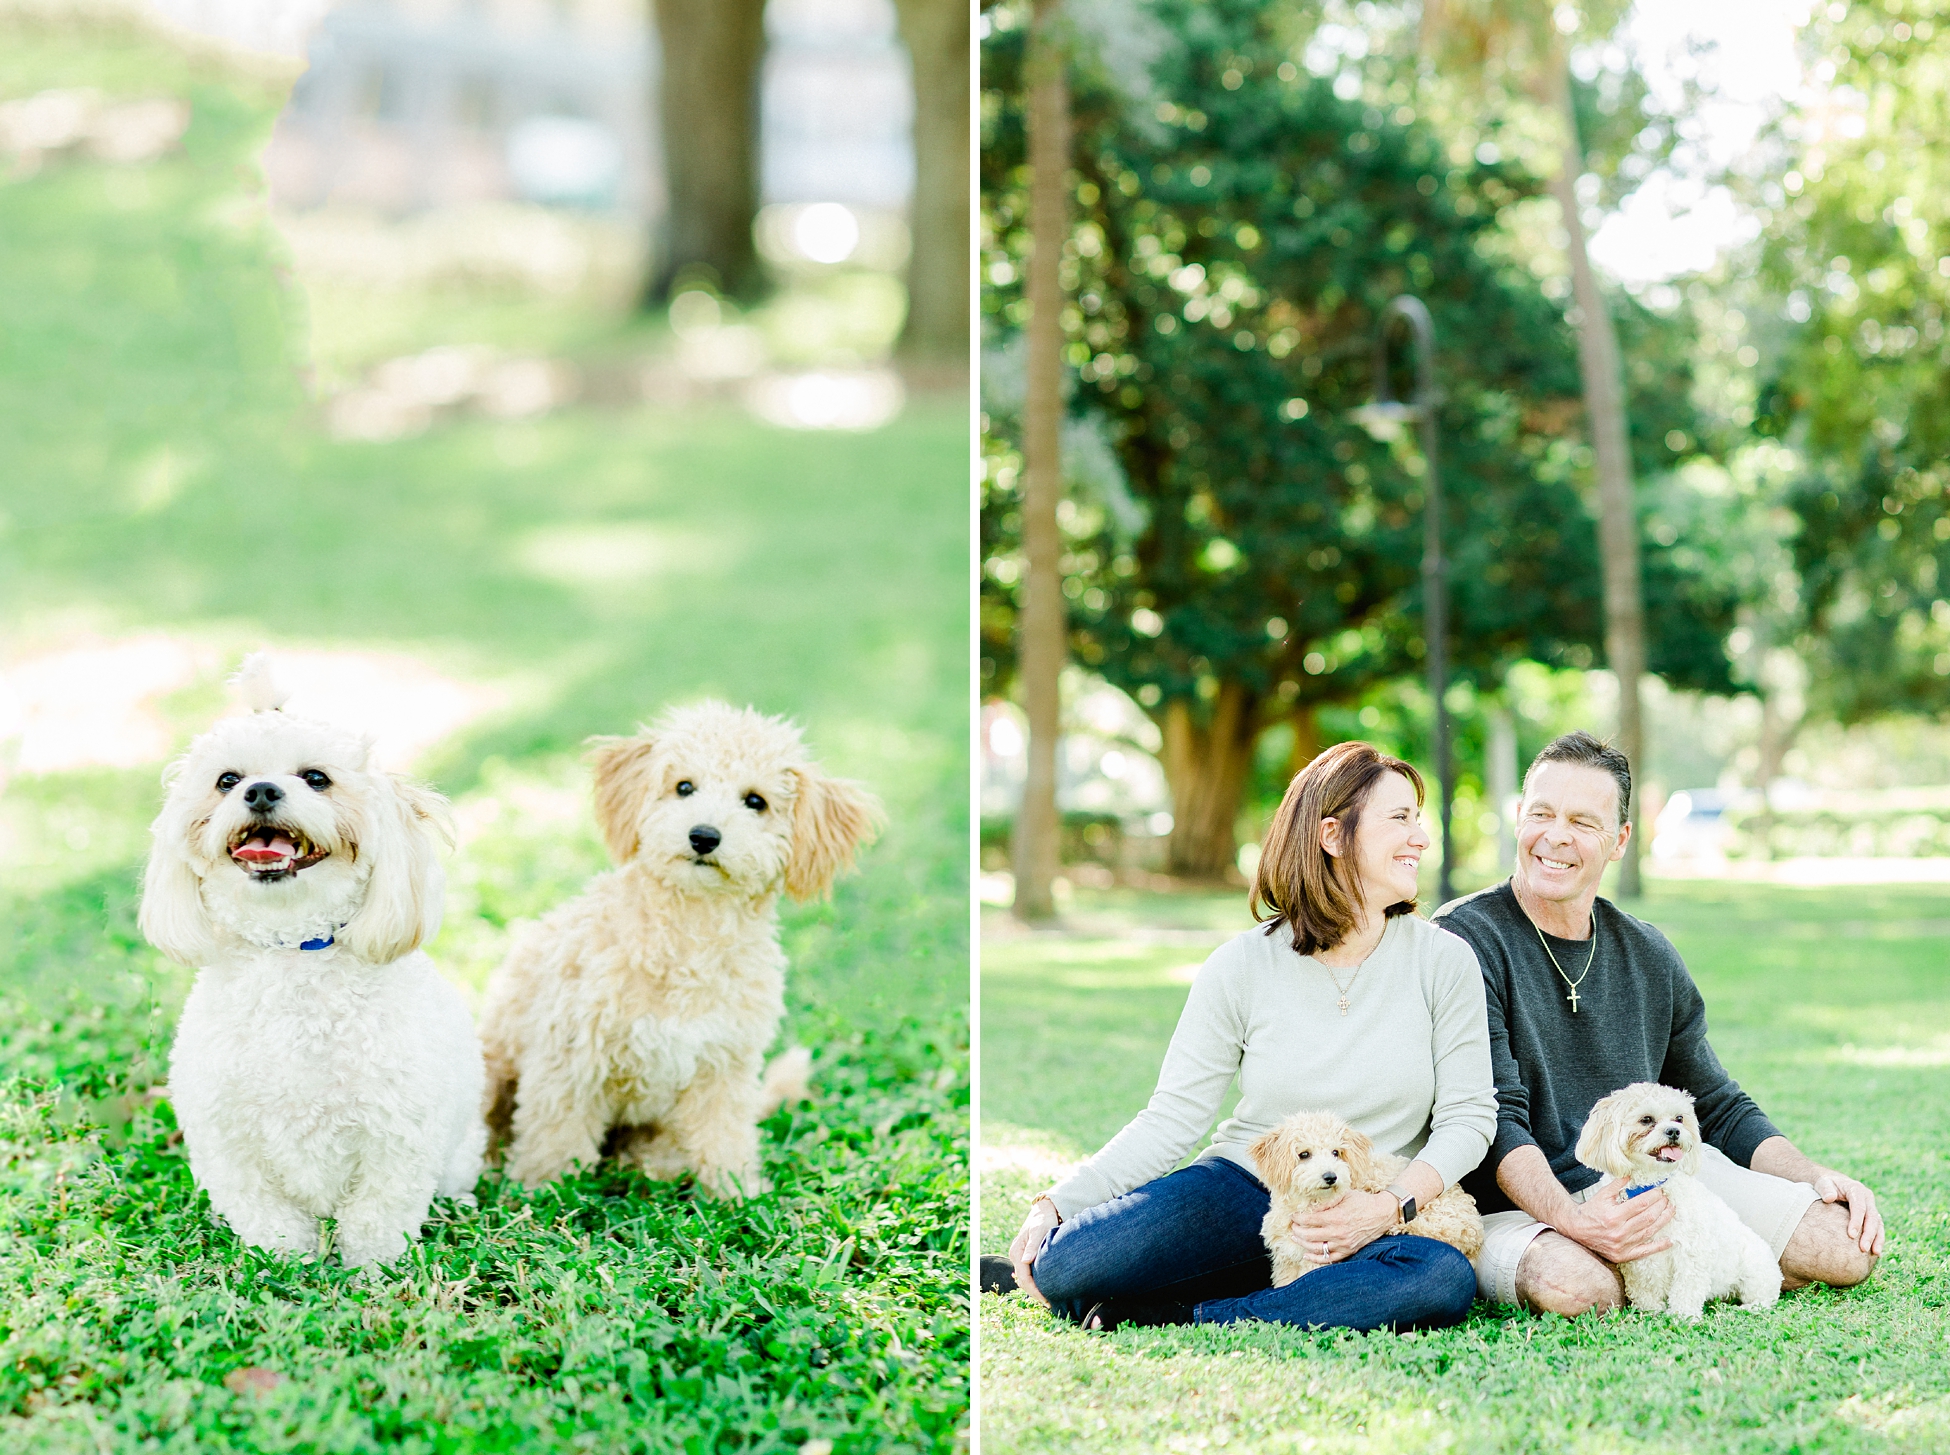 Holiday Mini Sessions Part 2 | © Ailyn La Torre Photography 2018